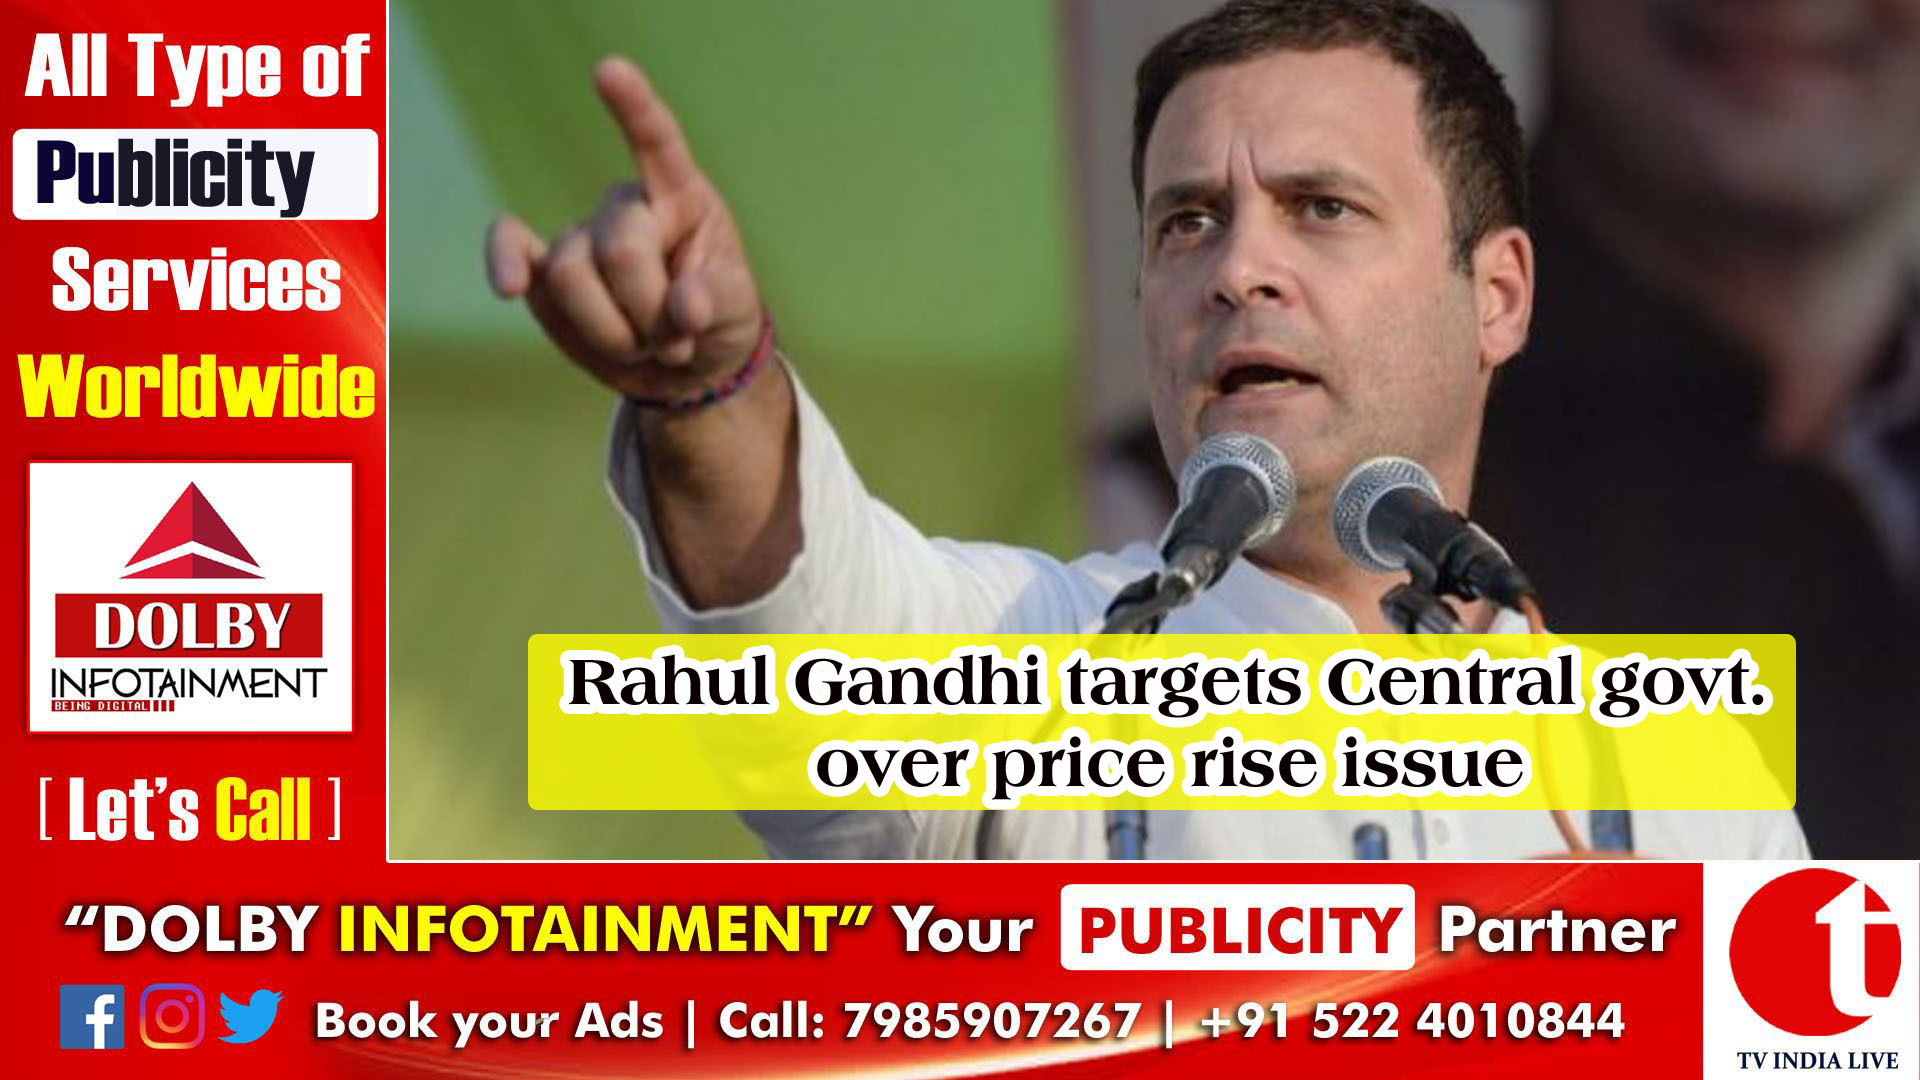 Rahul Gandhi targets Central govt. over price rise issue